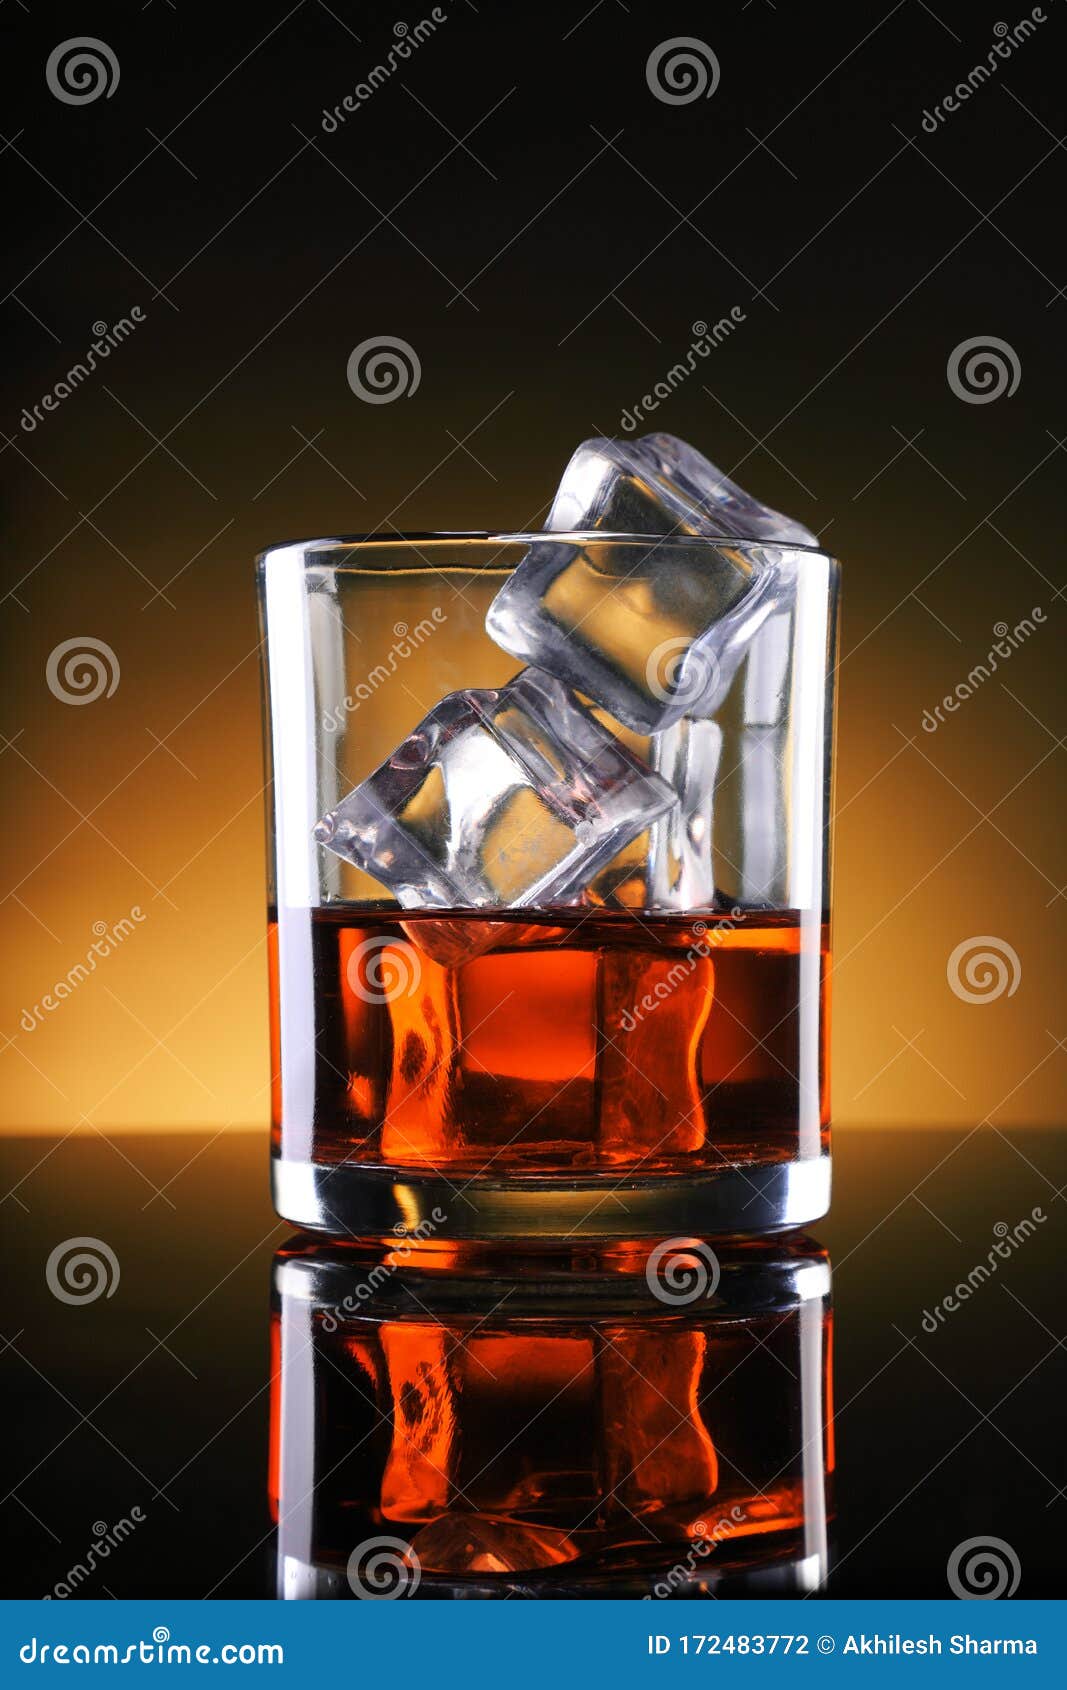 Download 4 820 Glass Whisky Ice Cubes Photos Free Royalty Free Stock Photos From Dreamstime Yellowimages Mockups